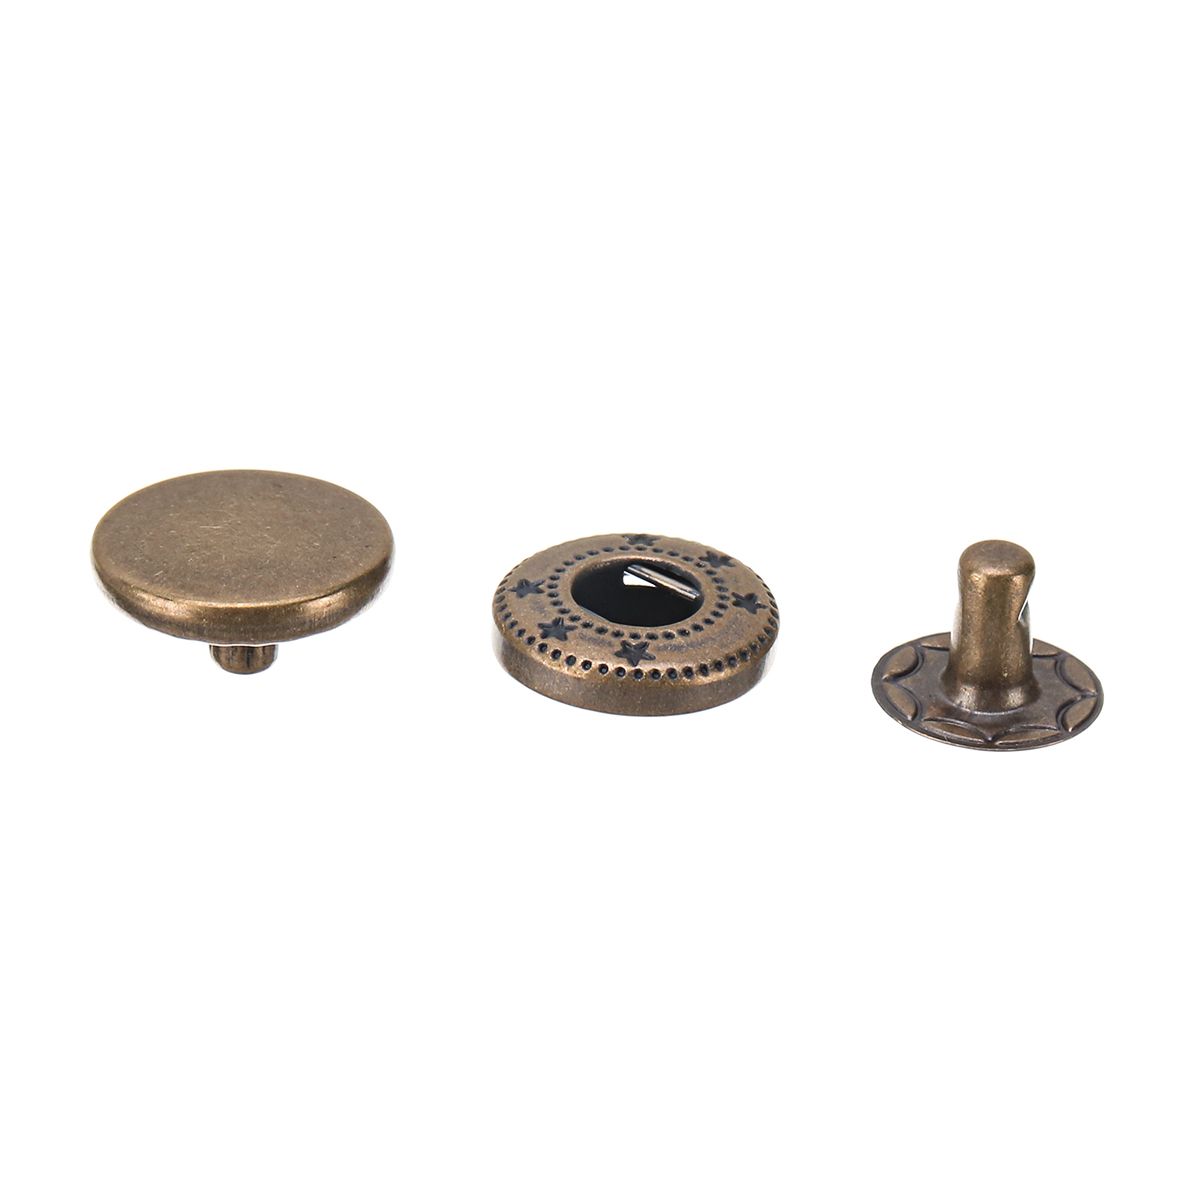 40100-Set-Rivets-DIY-Leather-Craft-Fasteners-Buttons-Copper-Press-Studs-Silver-Bronze-Rivets-With-To-1420040